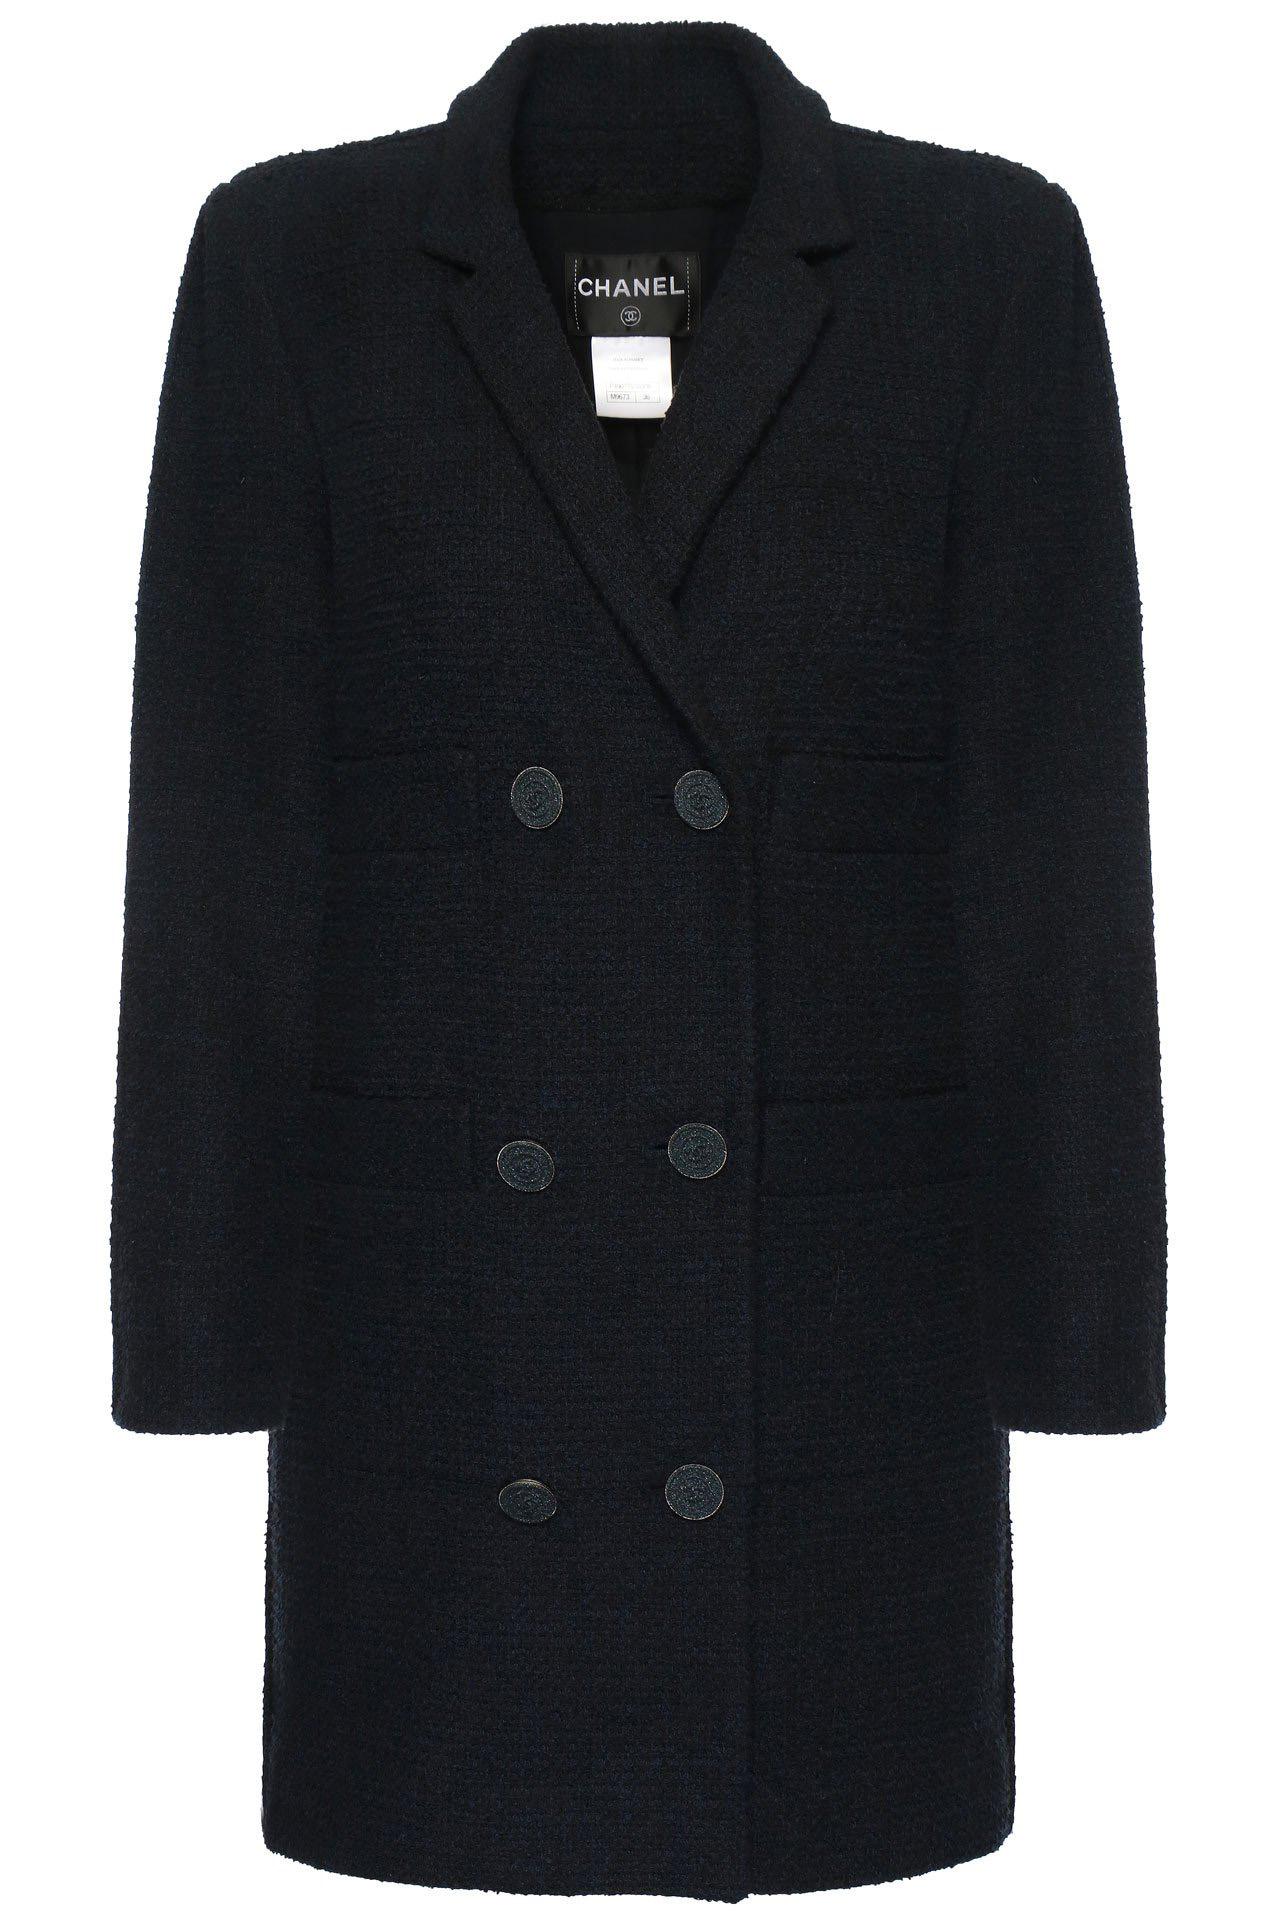 Women's or Men's Chanel New CC Buttons RelaxedTweed Jacket For Sale